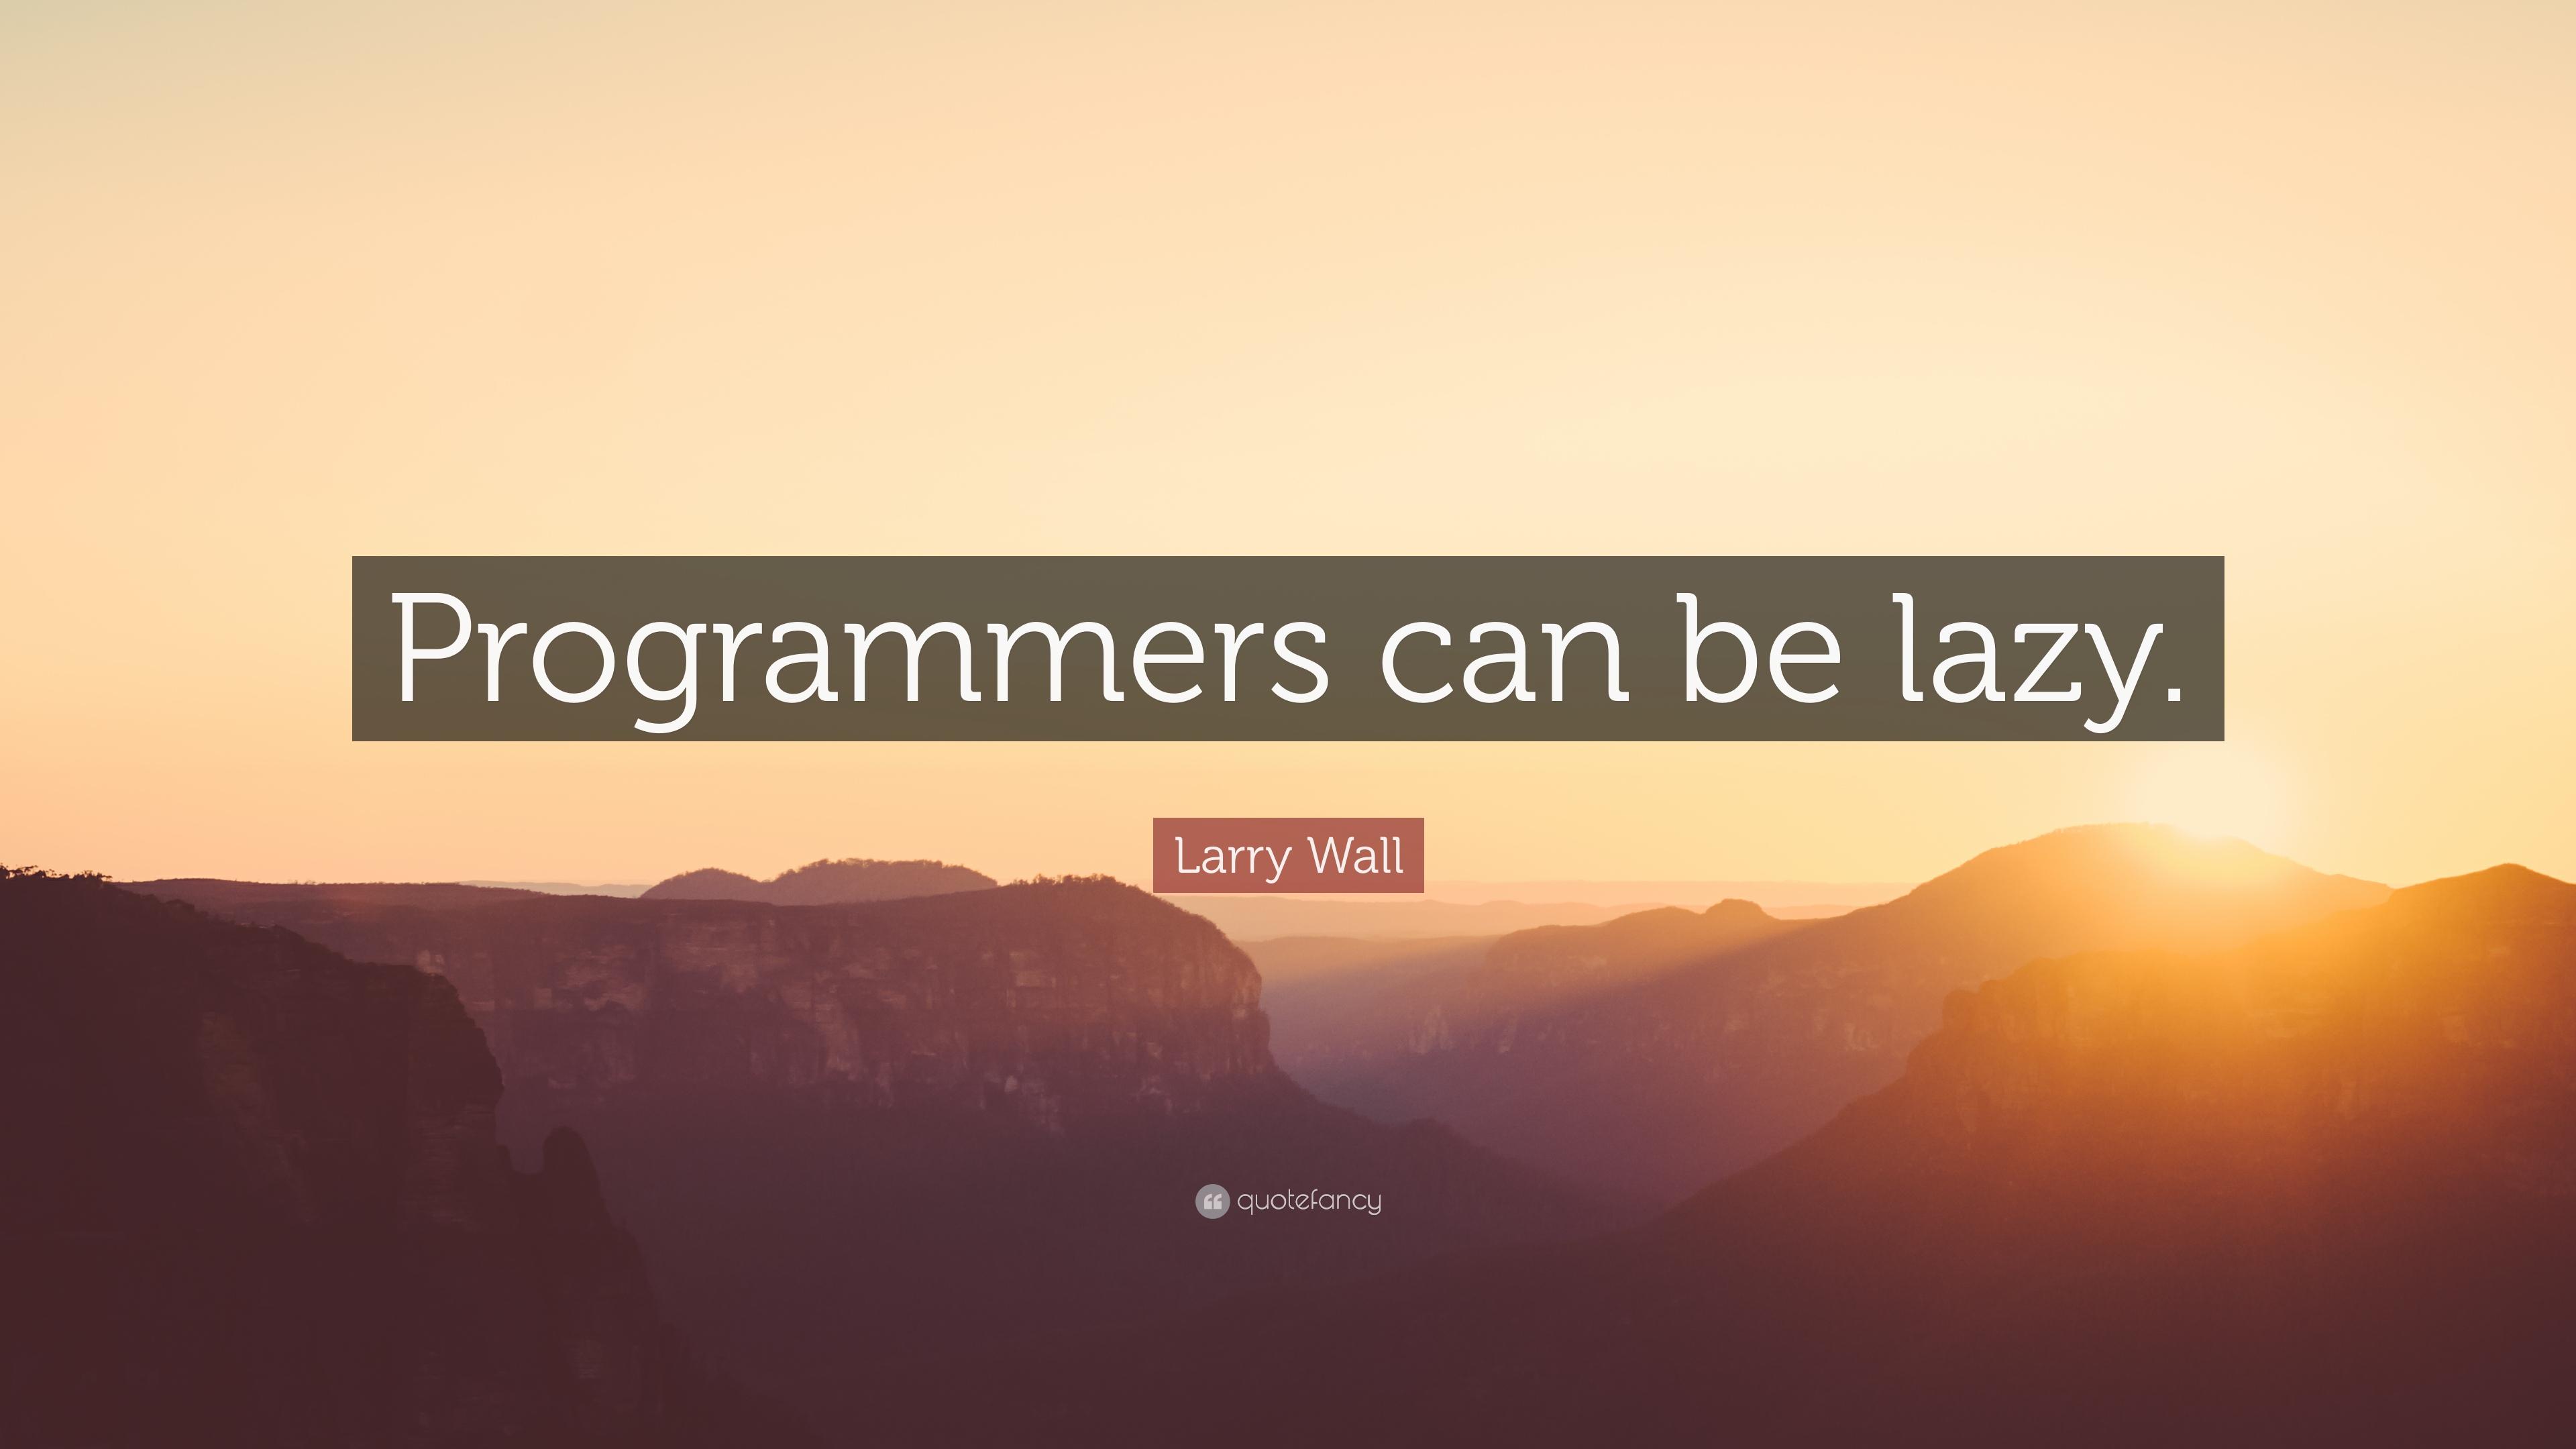 Larry Wall Quote: “Programmers can be lazy.” (9 wallpaper)